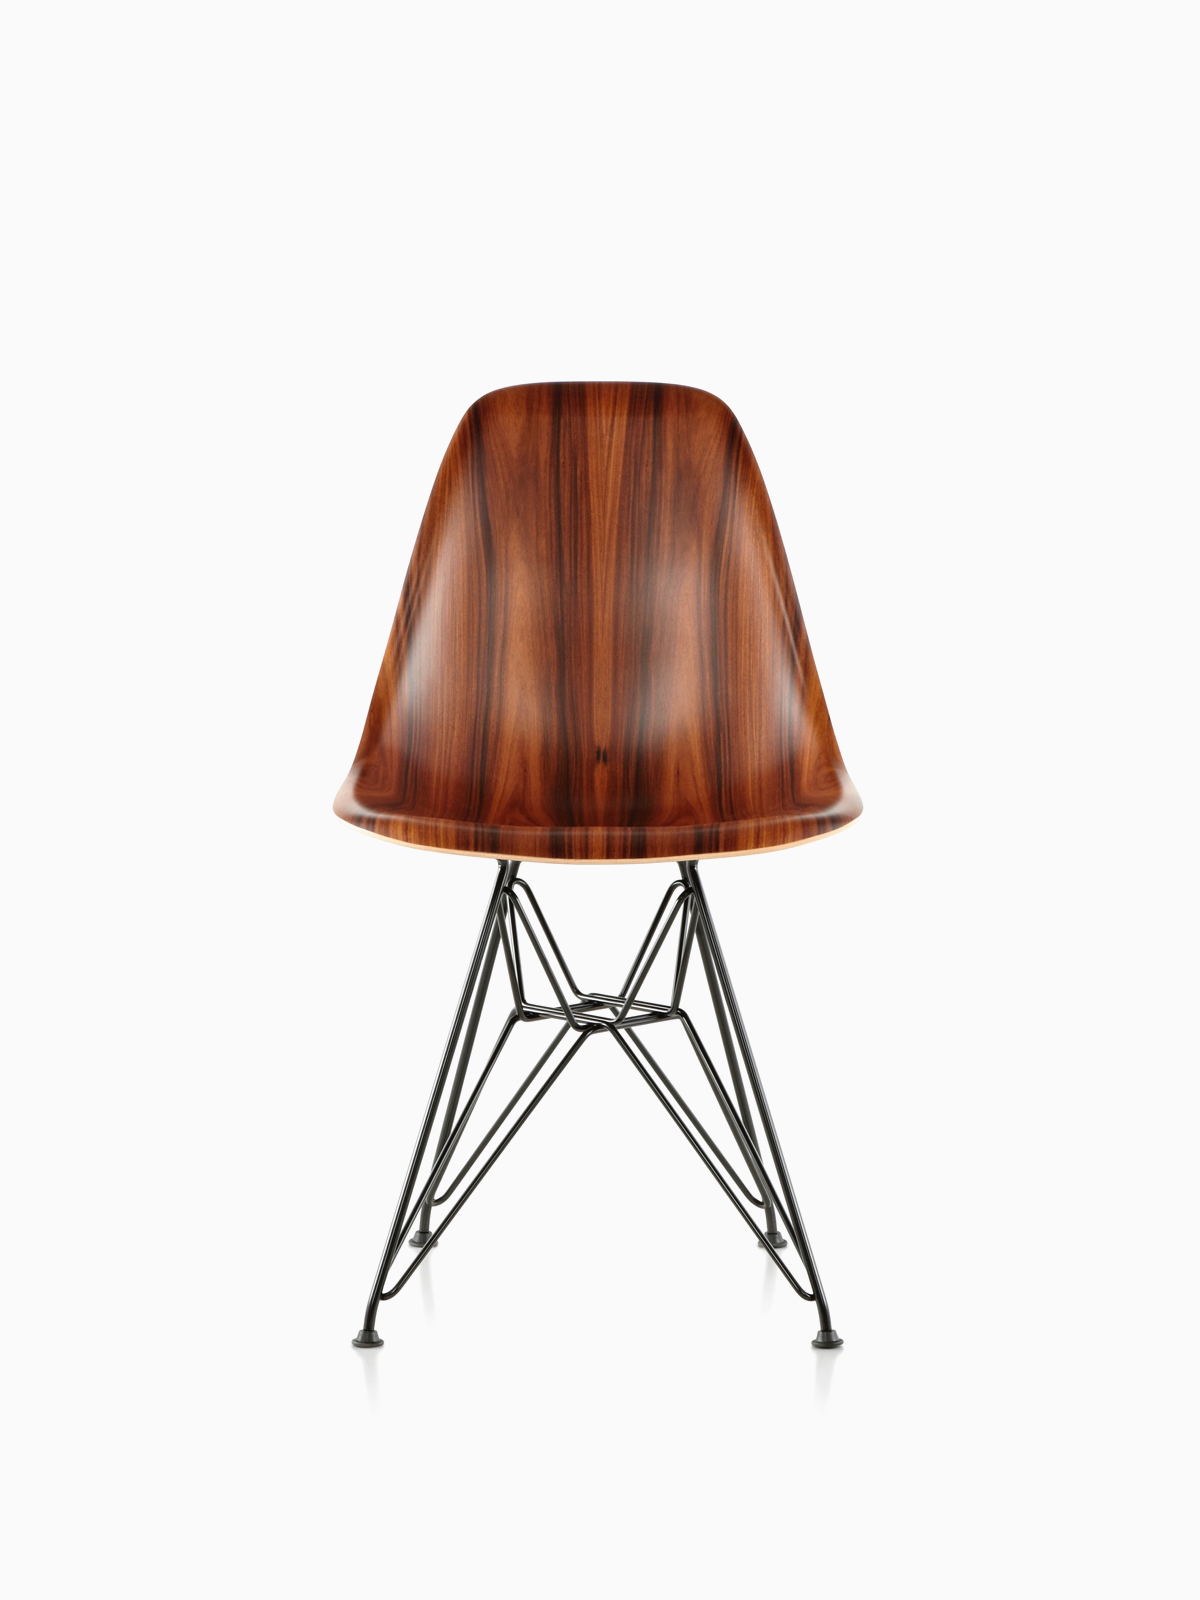 Eames Moulded Wood Chairs